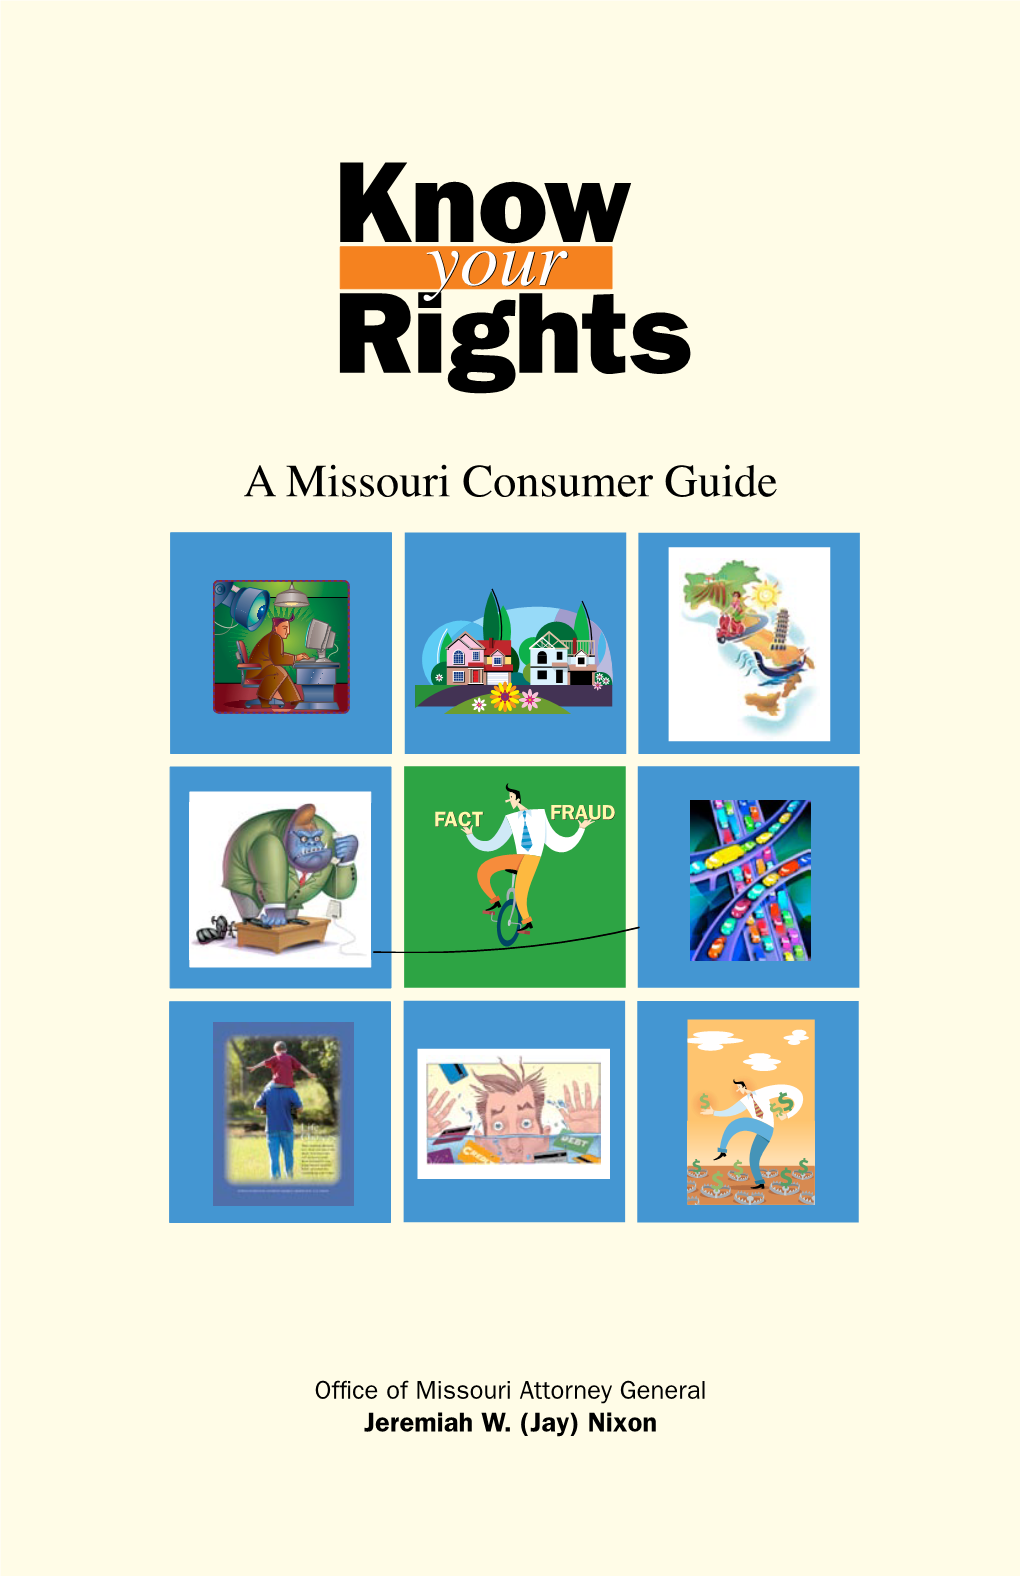 Know Your Rights Consumer Guide for Missourians